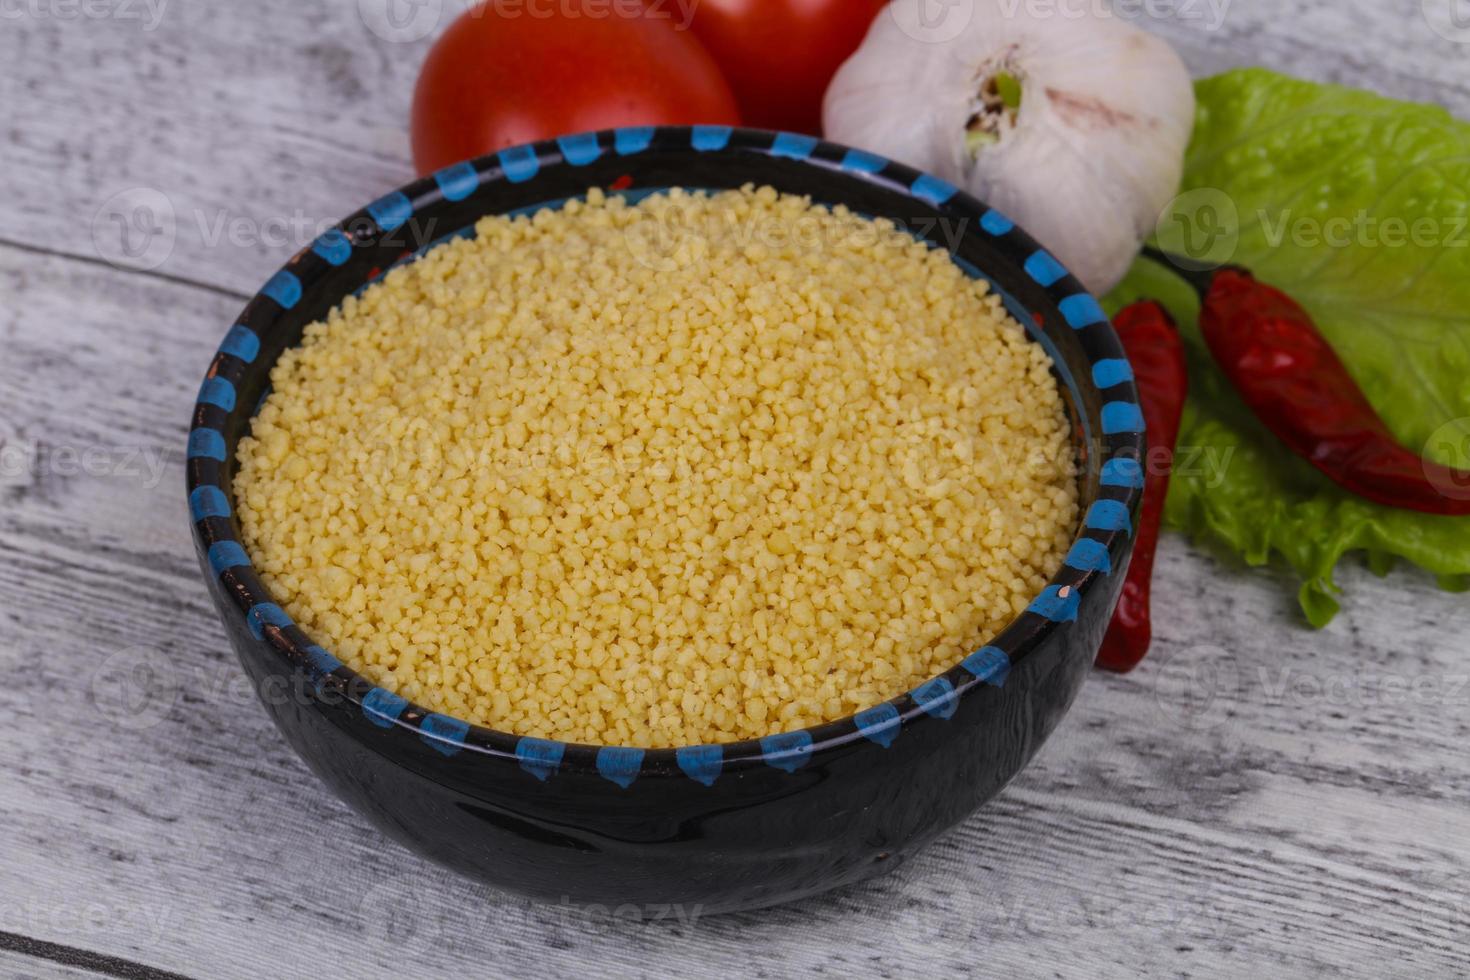 Raw couscous in the bowl served salad leaves, tomato and pepper photo